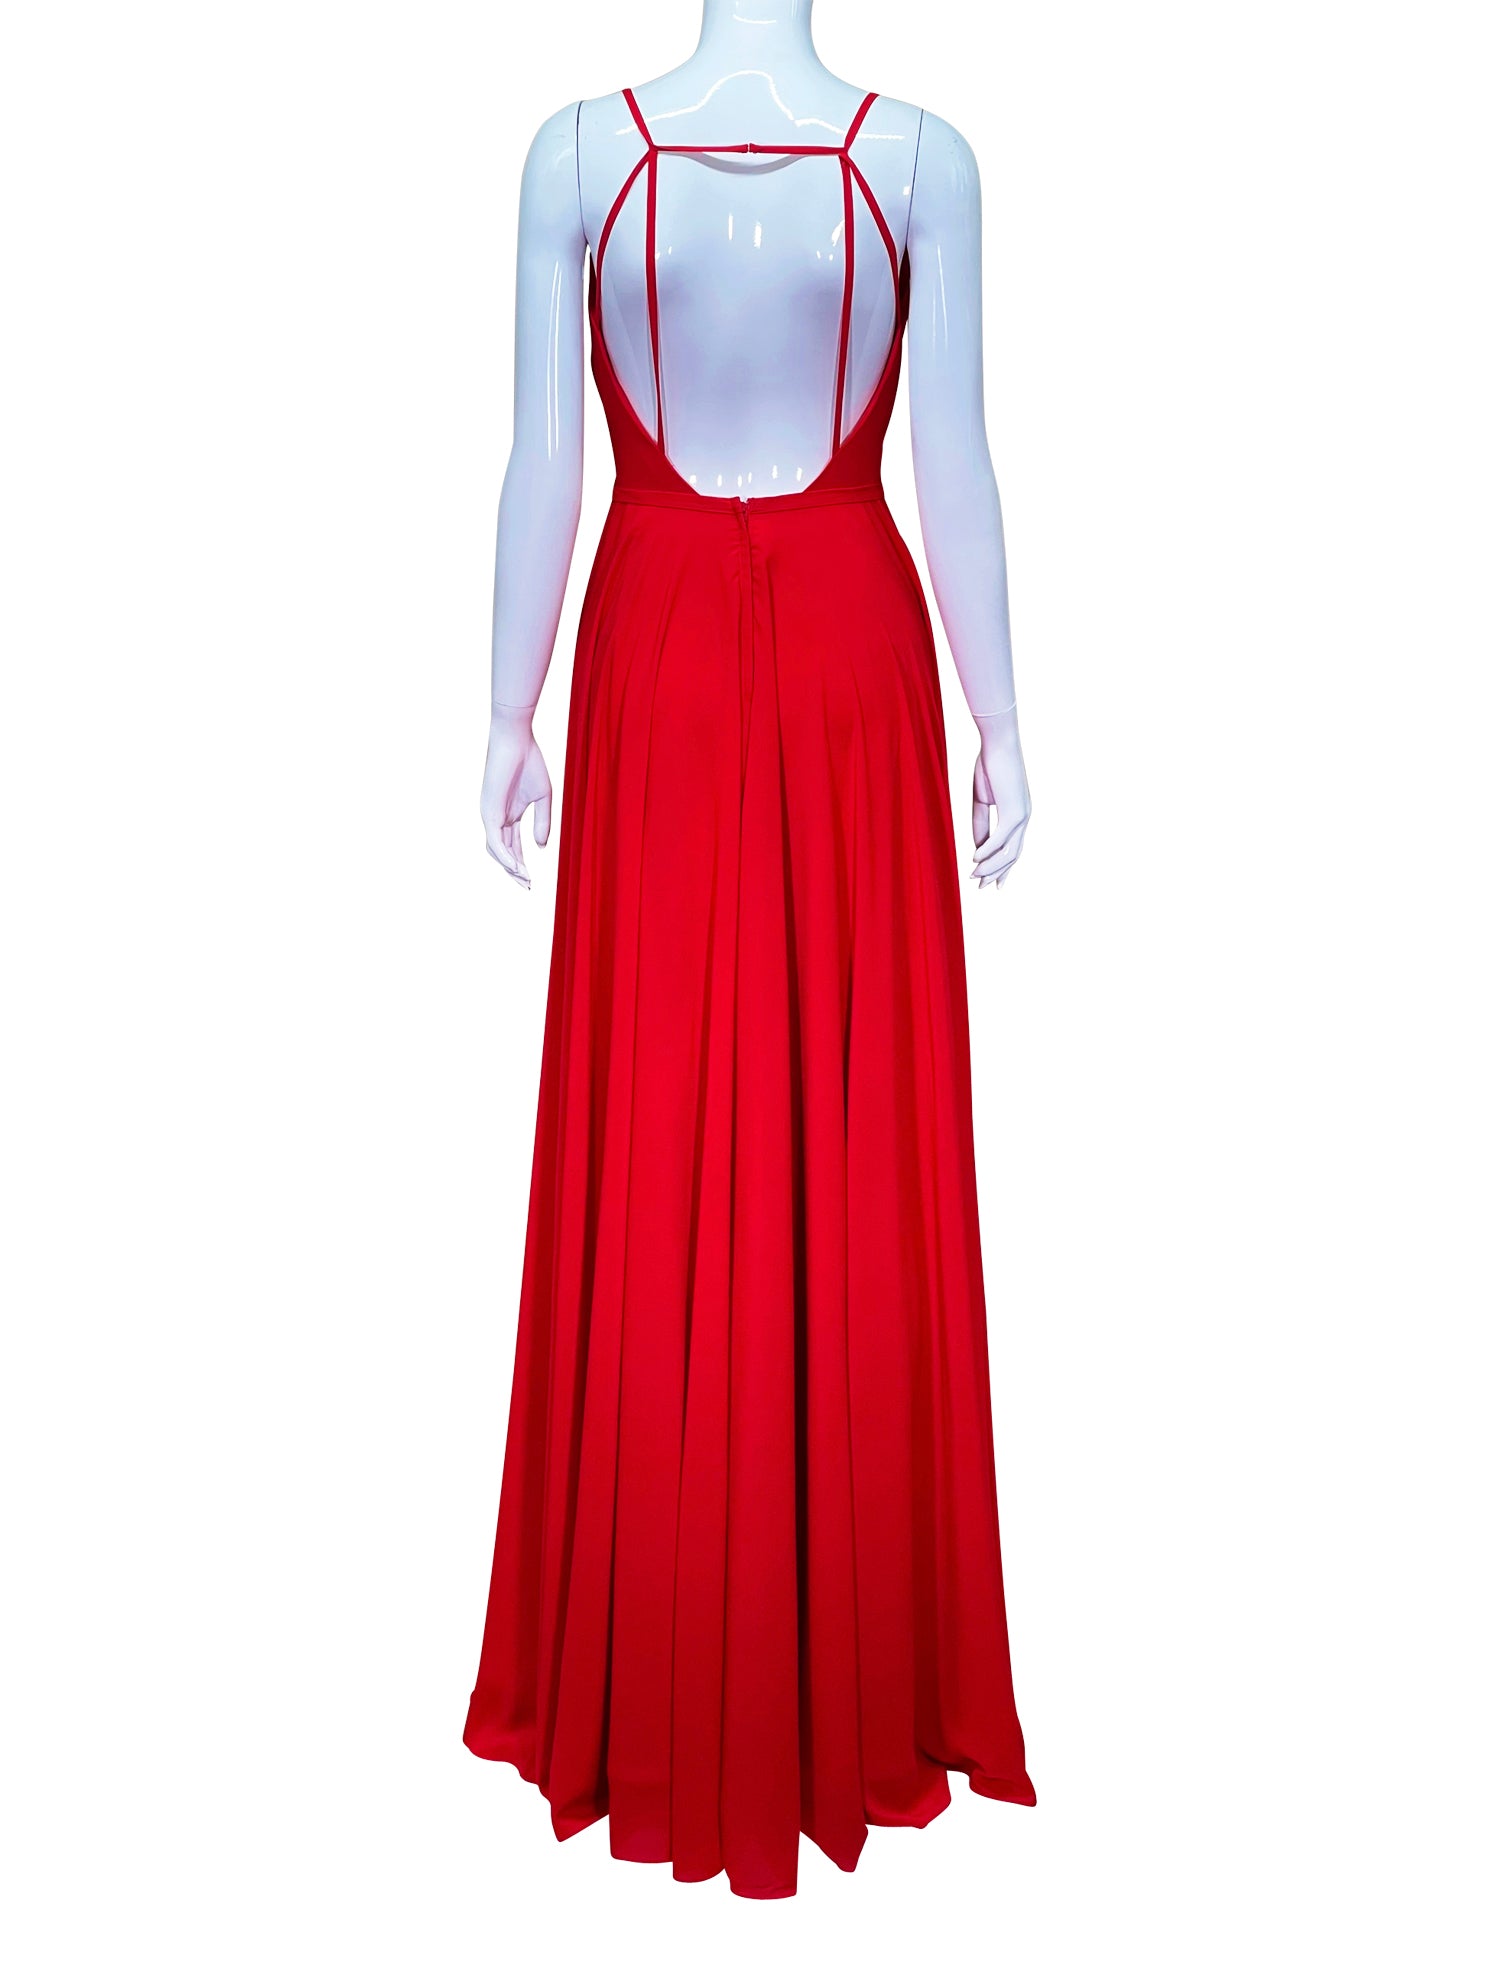 PG Red A-Line Evening Gown